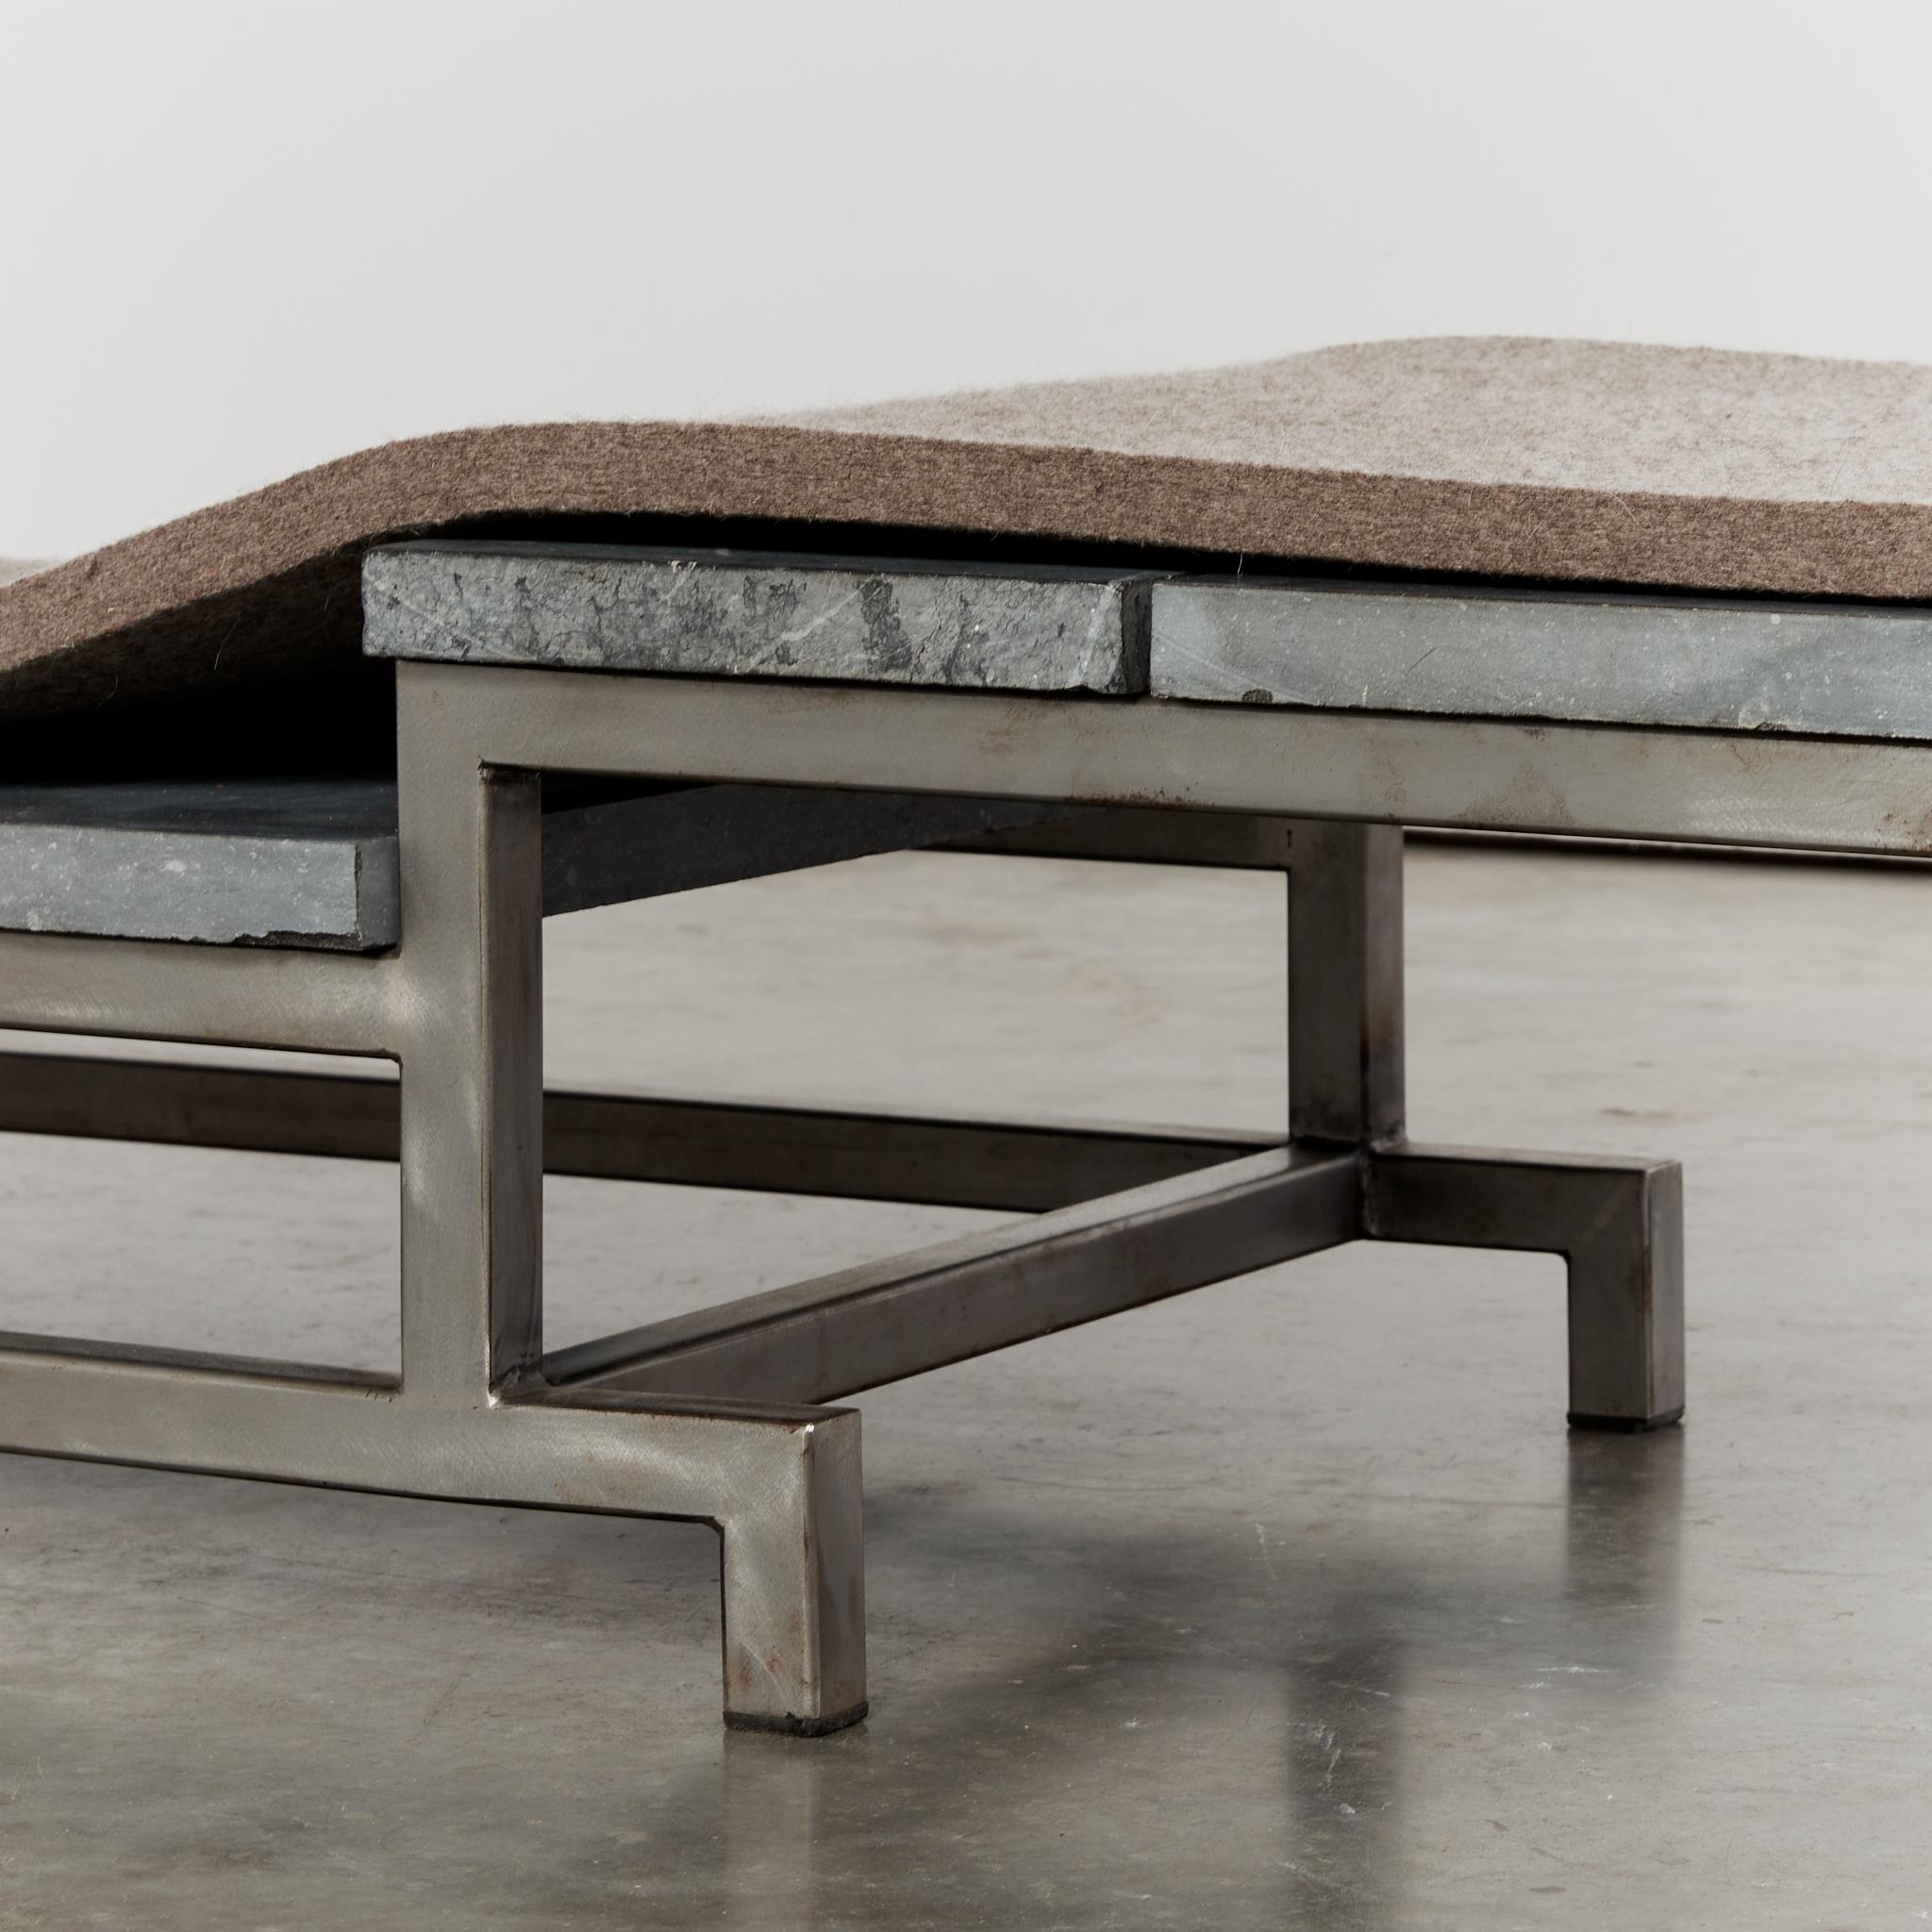 Marble stainless steel and felt daybed by Christoph Siebrasse For Sale 11